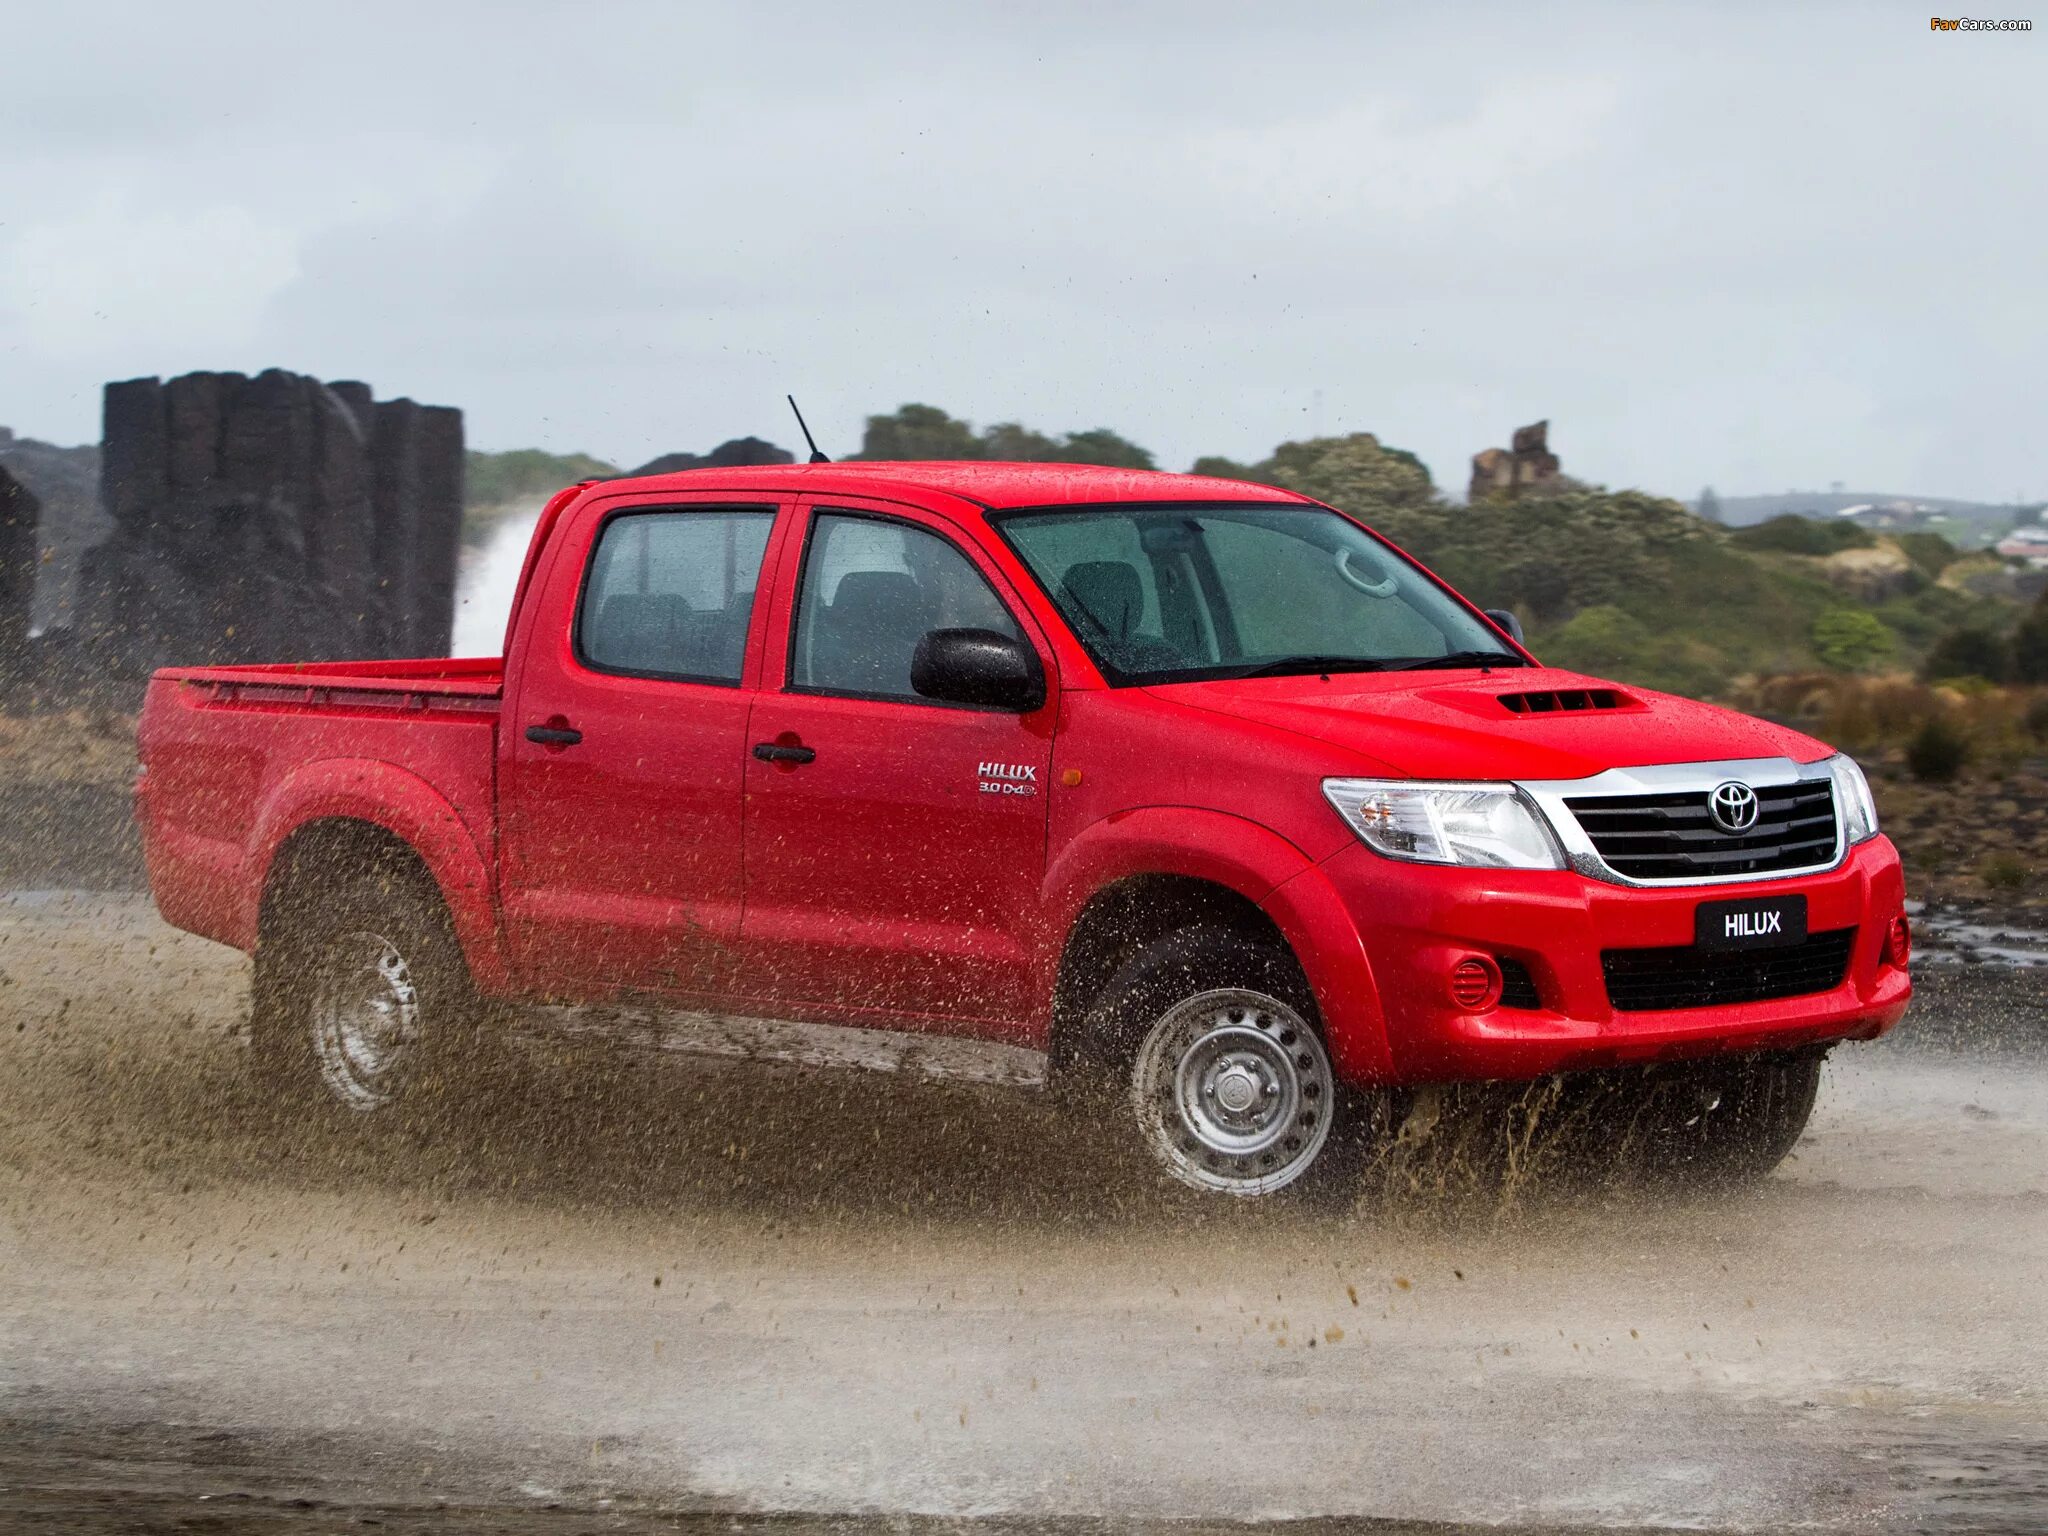 Toyota Hilux 4x4 Double Cab. Red Toyota Hilux. Toyota Hilux 4x4 2014. Hilux Double Cab.